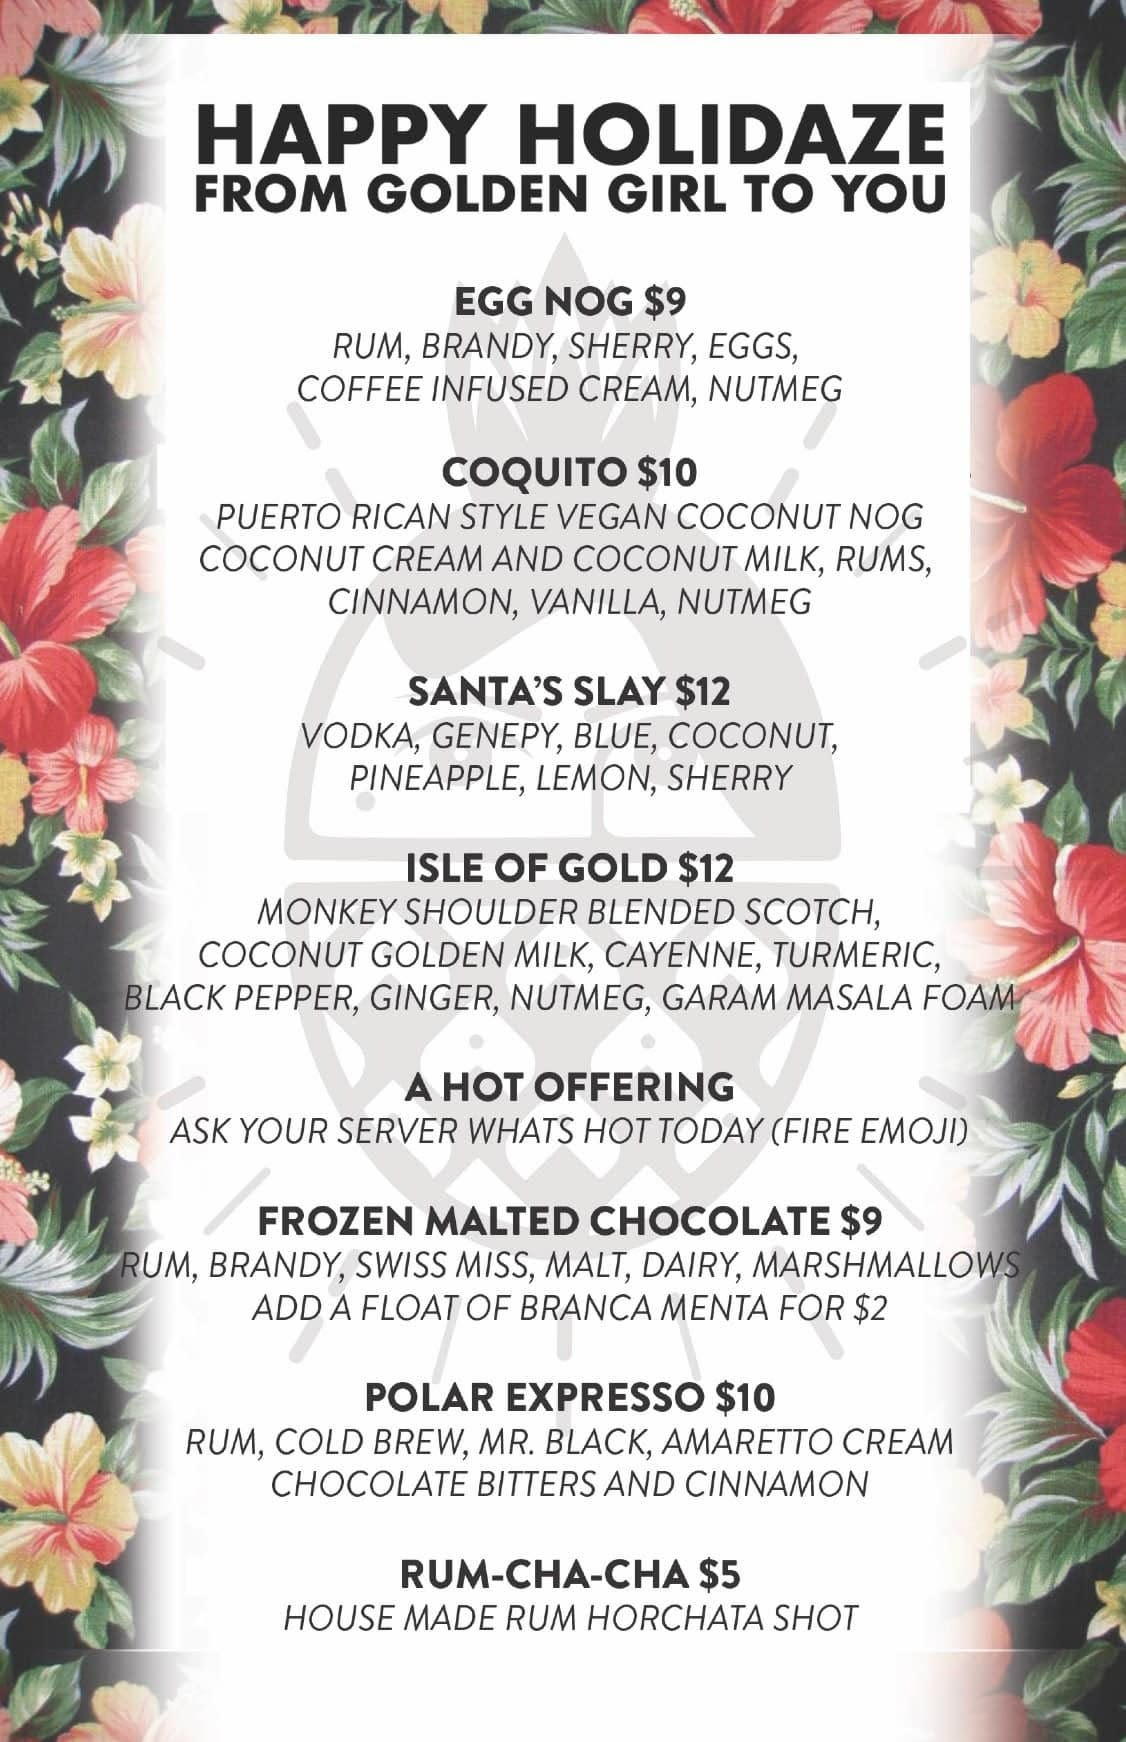 The Golden Girl Rum Club's 2023 Happy Holidaze menu features six holiday-themed cocktails and one holiday-themed shot.